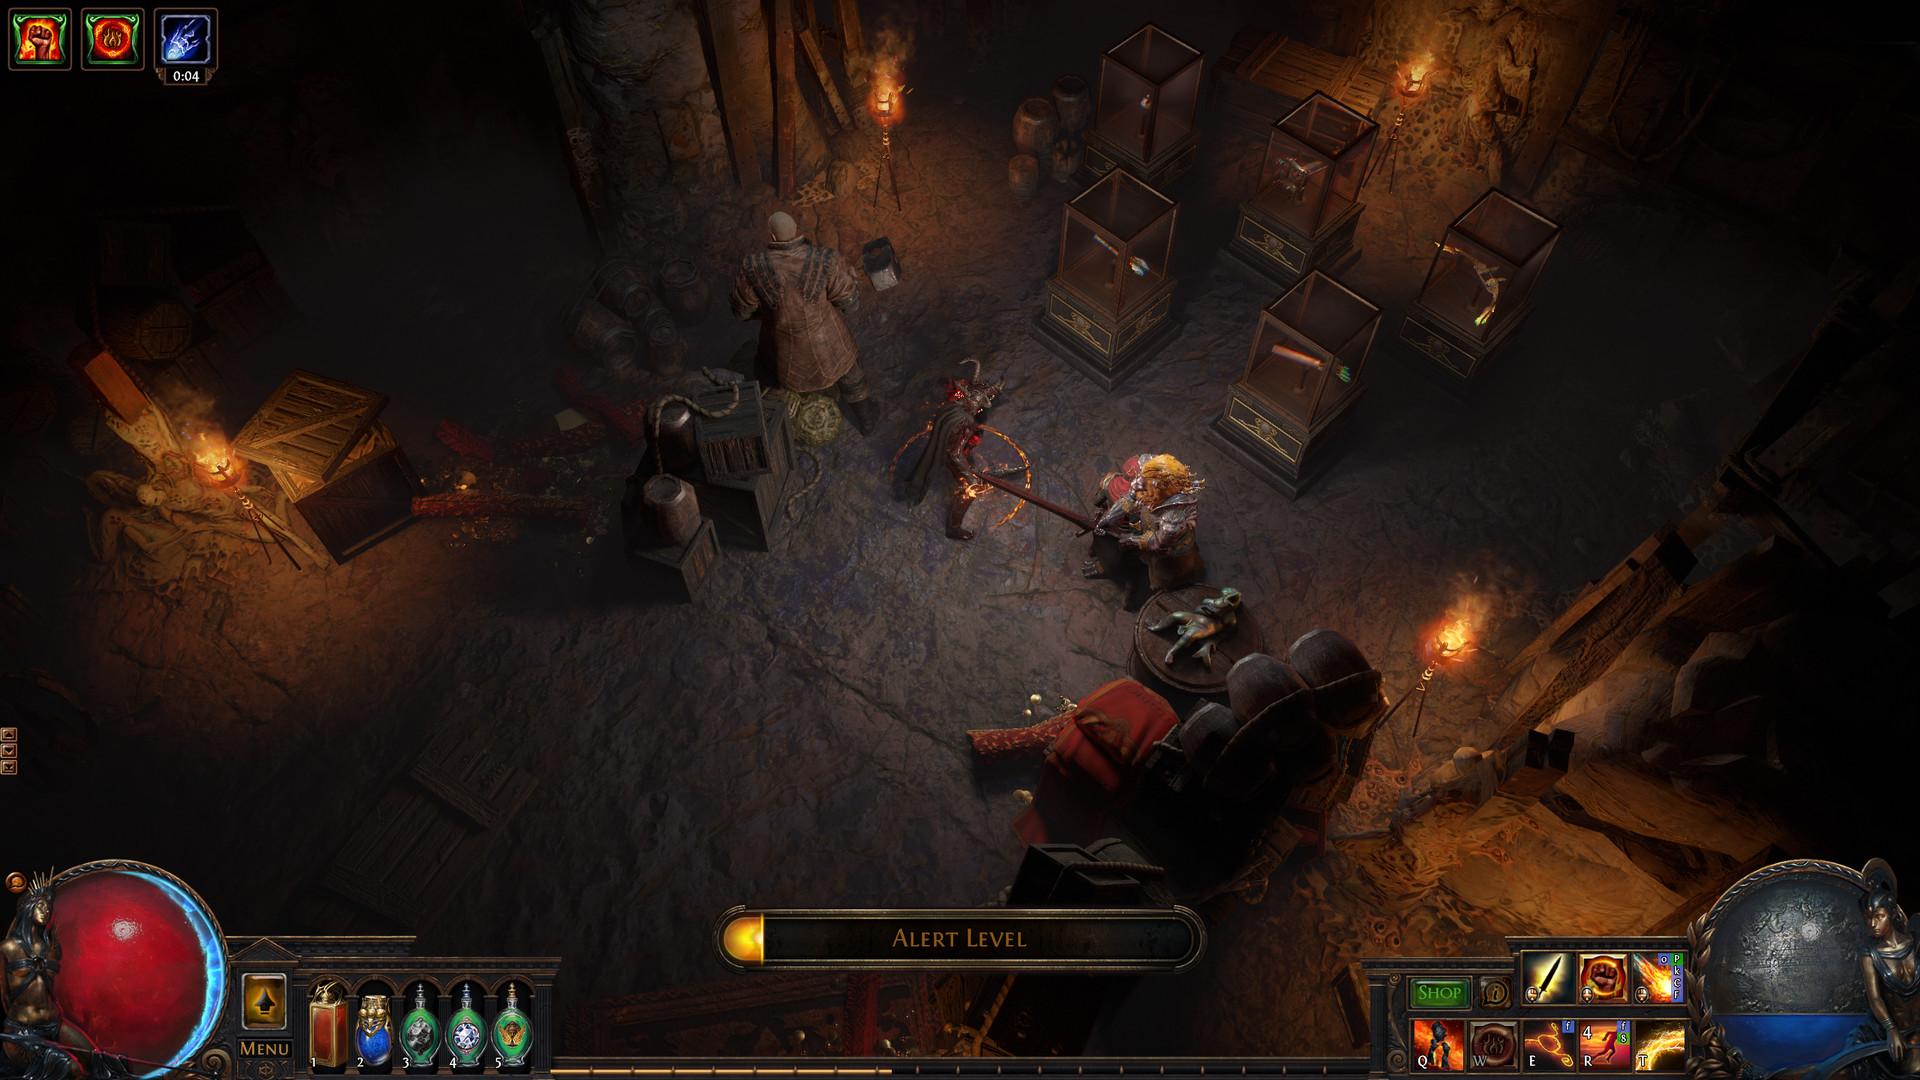 Screenshot №19 from game Path of Exile